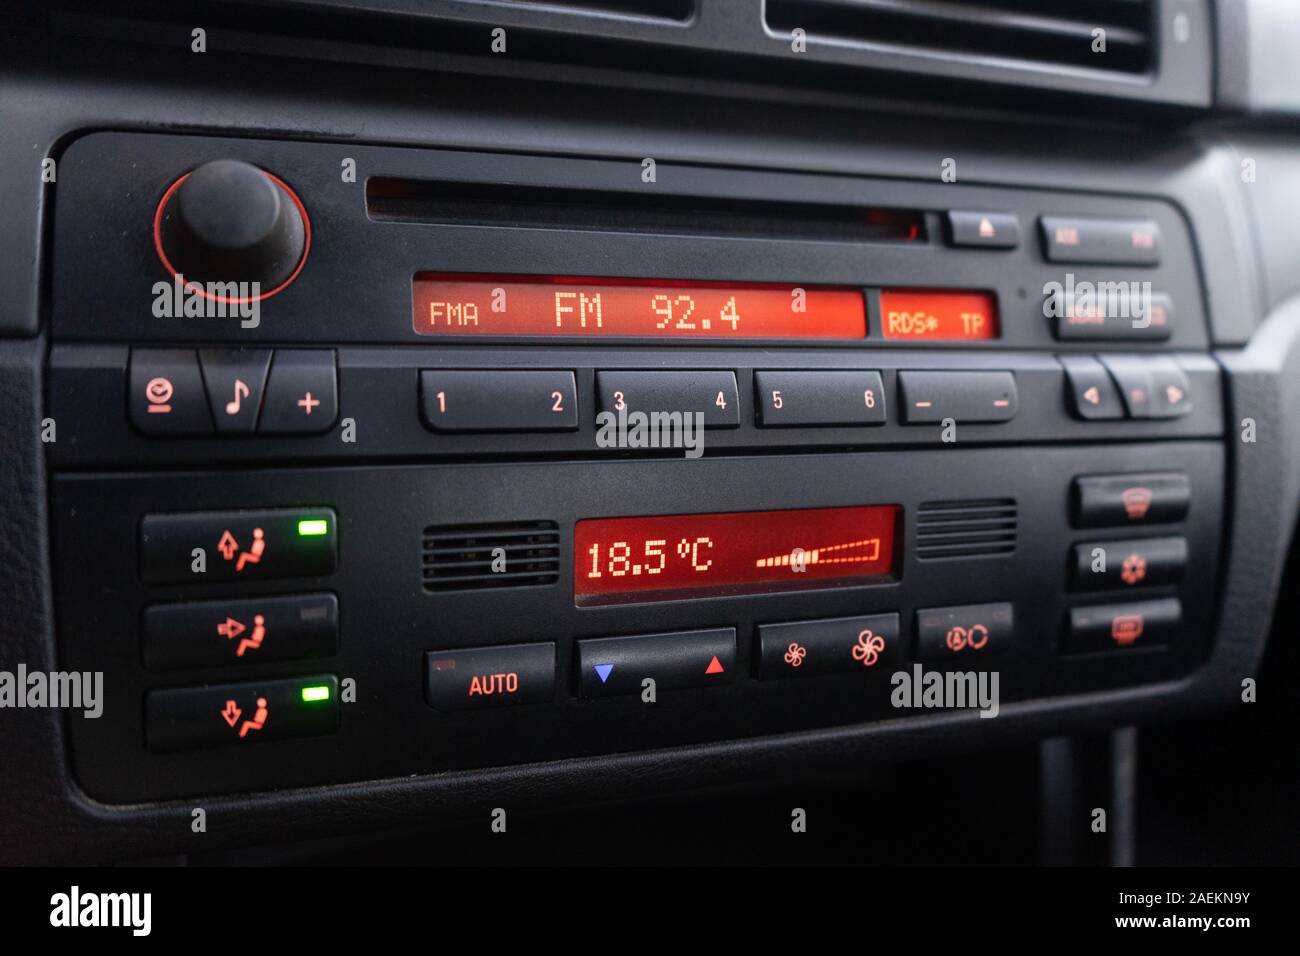 Modern car Radio with FM, CD, RDS and red illumination Stock Photo - Alamy